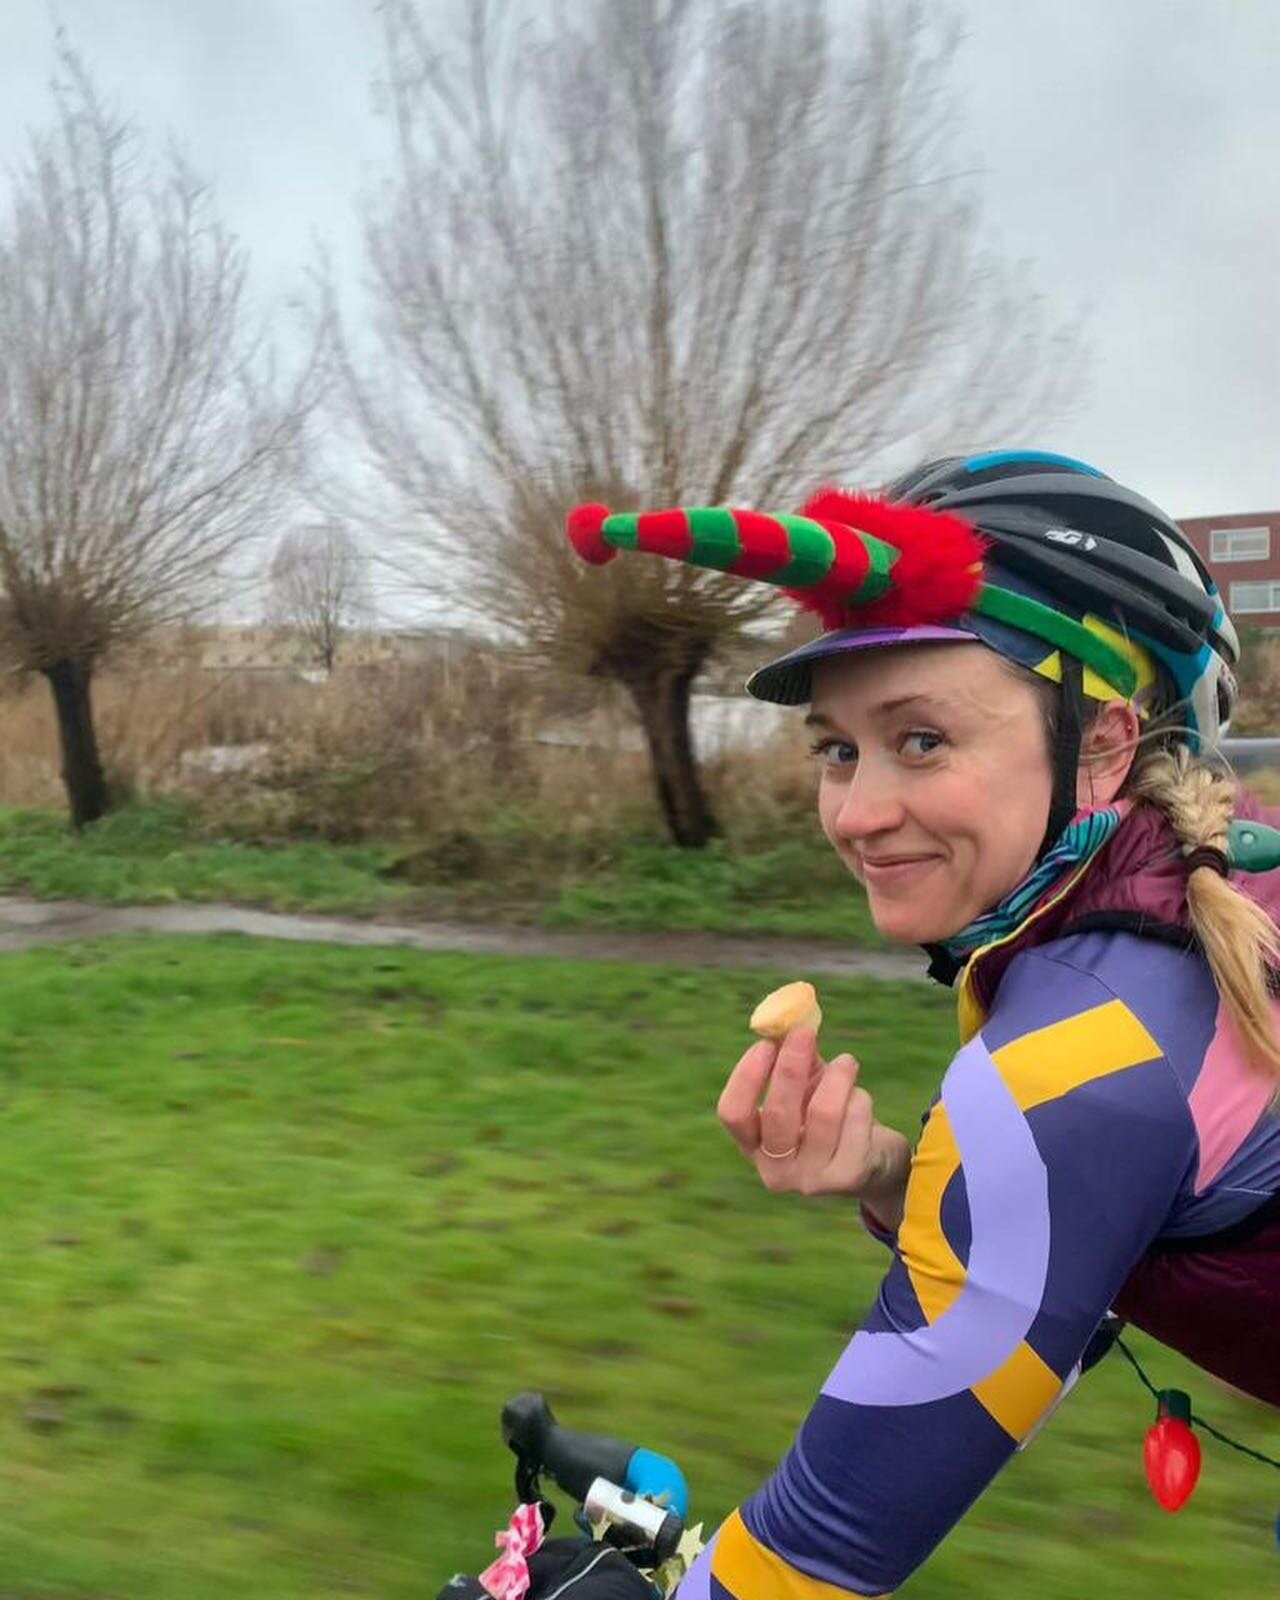 This December we&rsquo;ll be supporting your &lsquo;Kerst Kilometres&rsquo;

The best bit of running or riding with friends is the social side, and in the tough dark winter months, those connections are even more important. 

Join our community for a